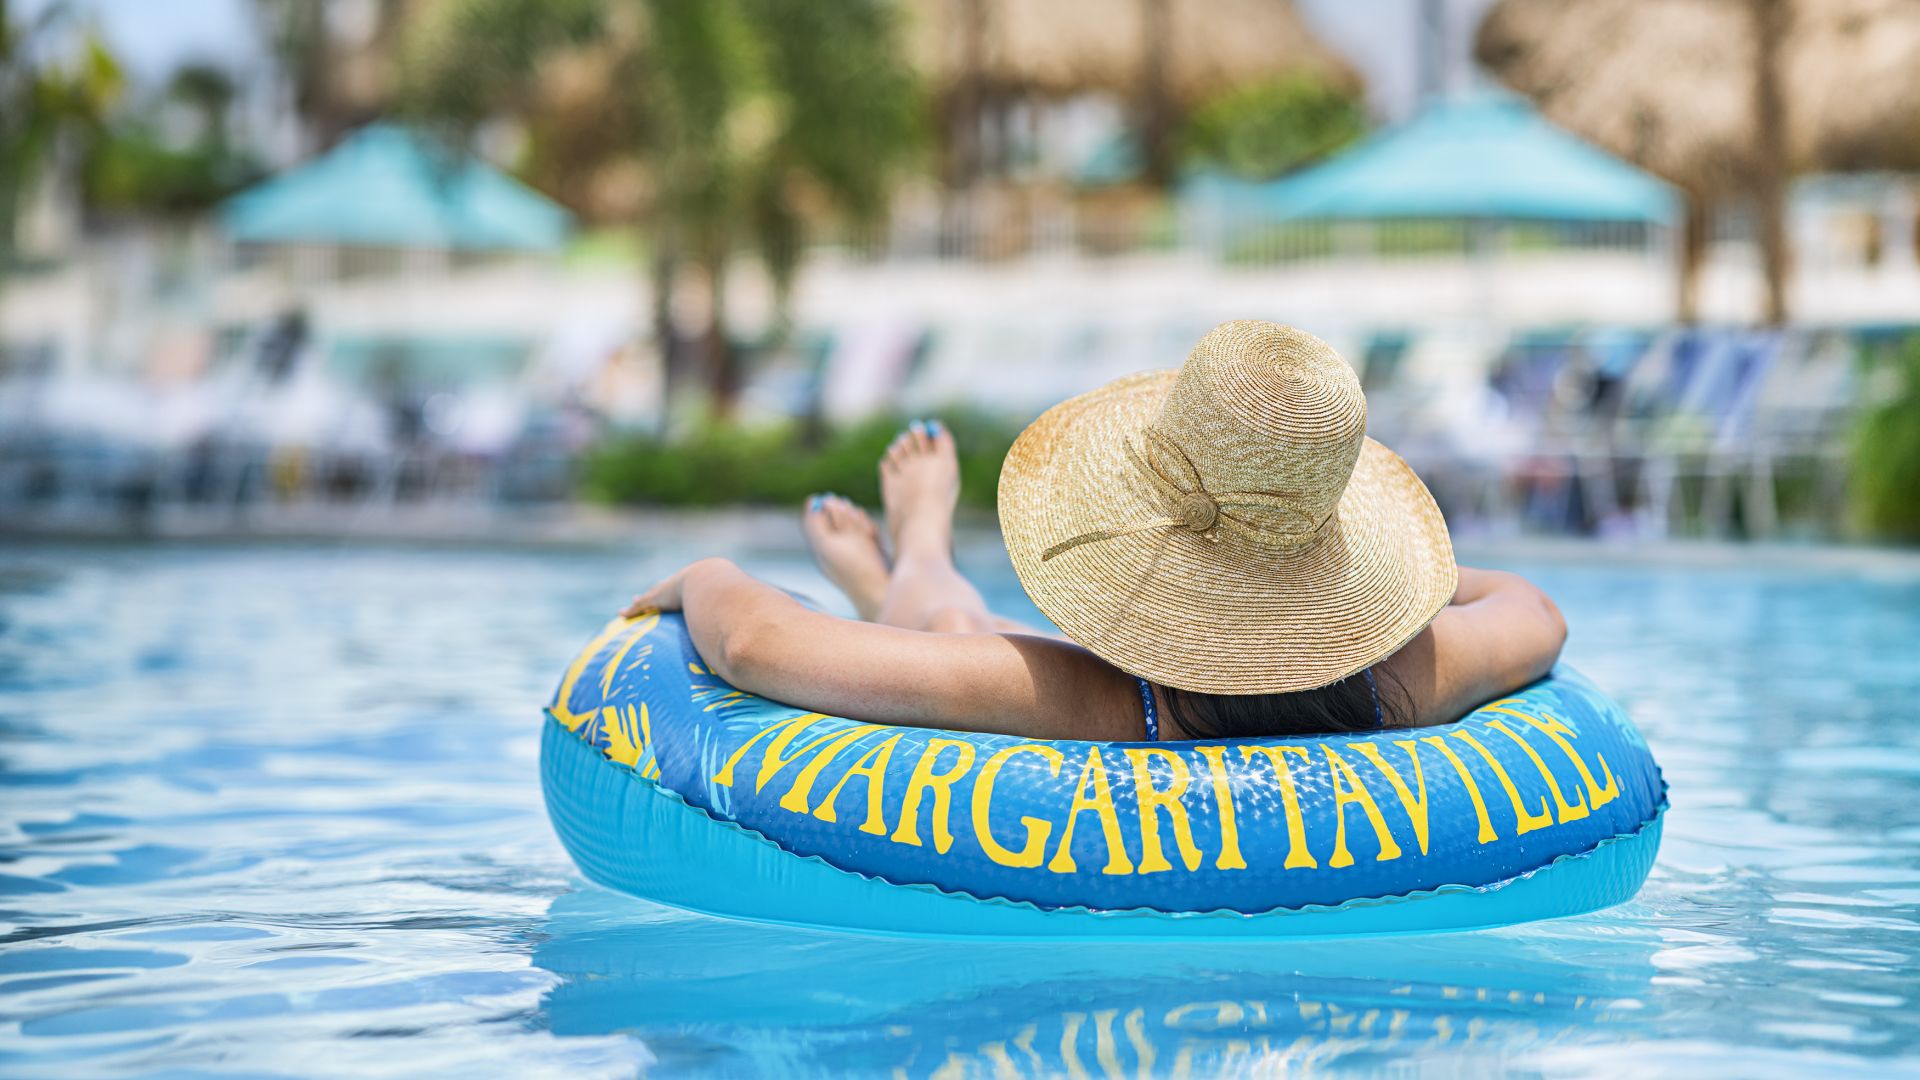 A Person In A Straw Hat In A Pool